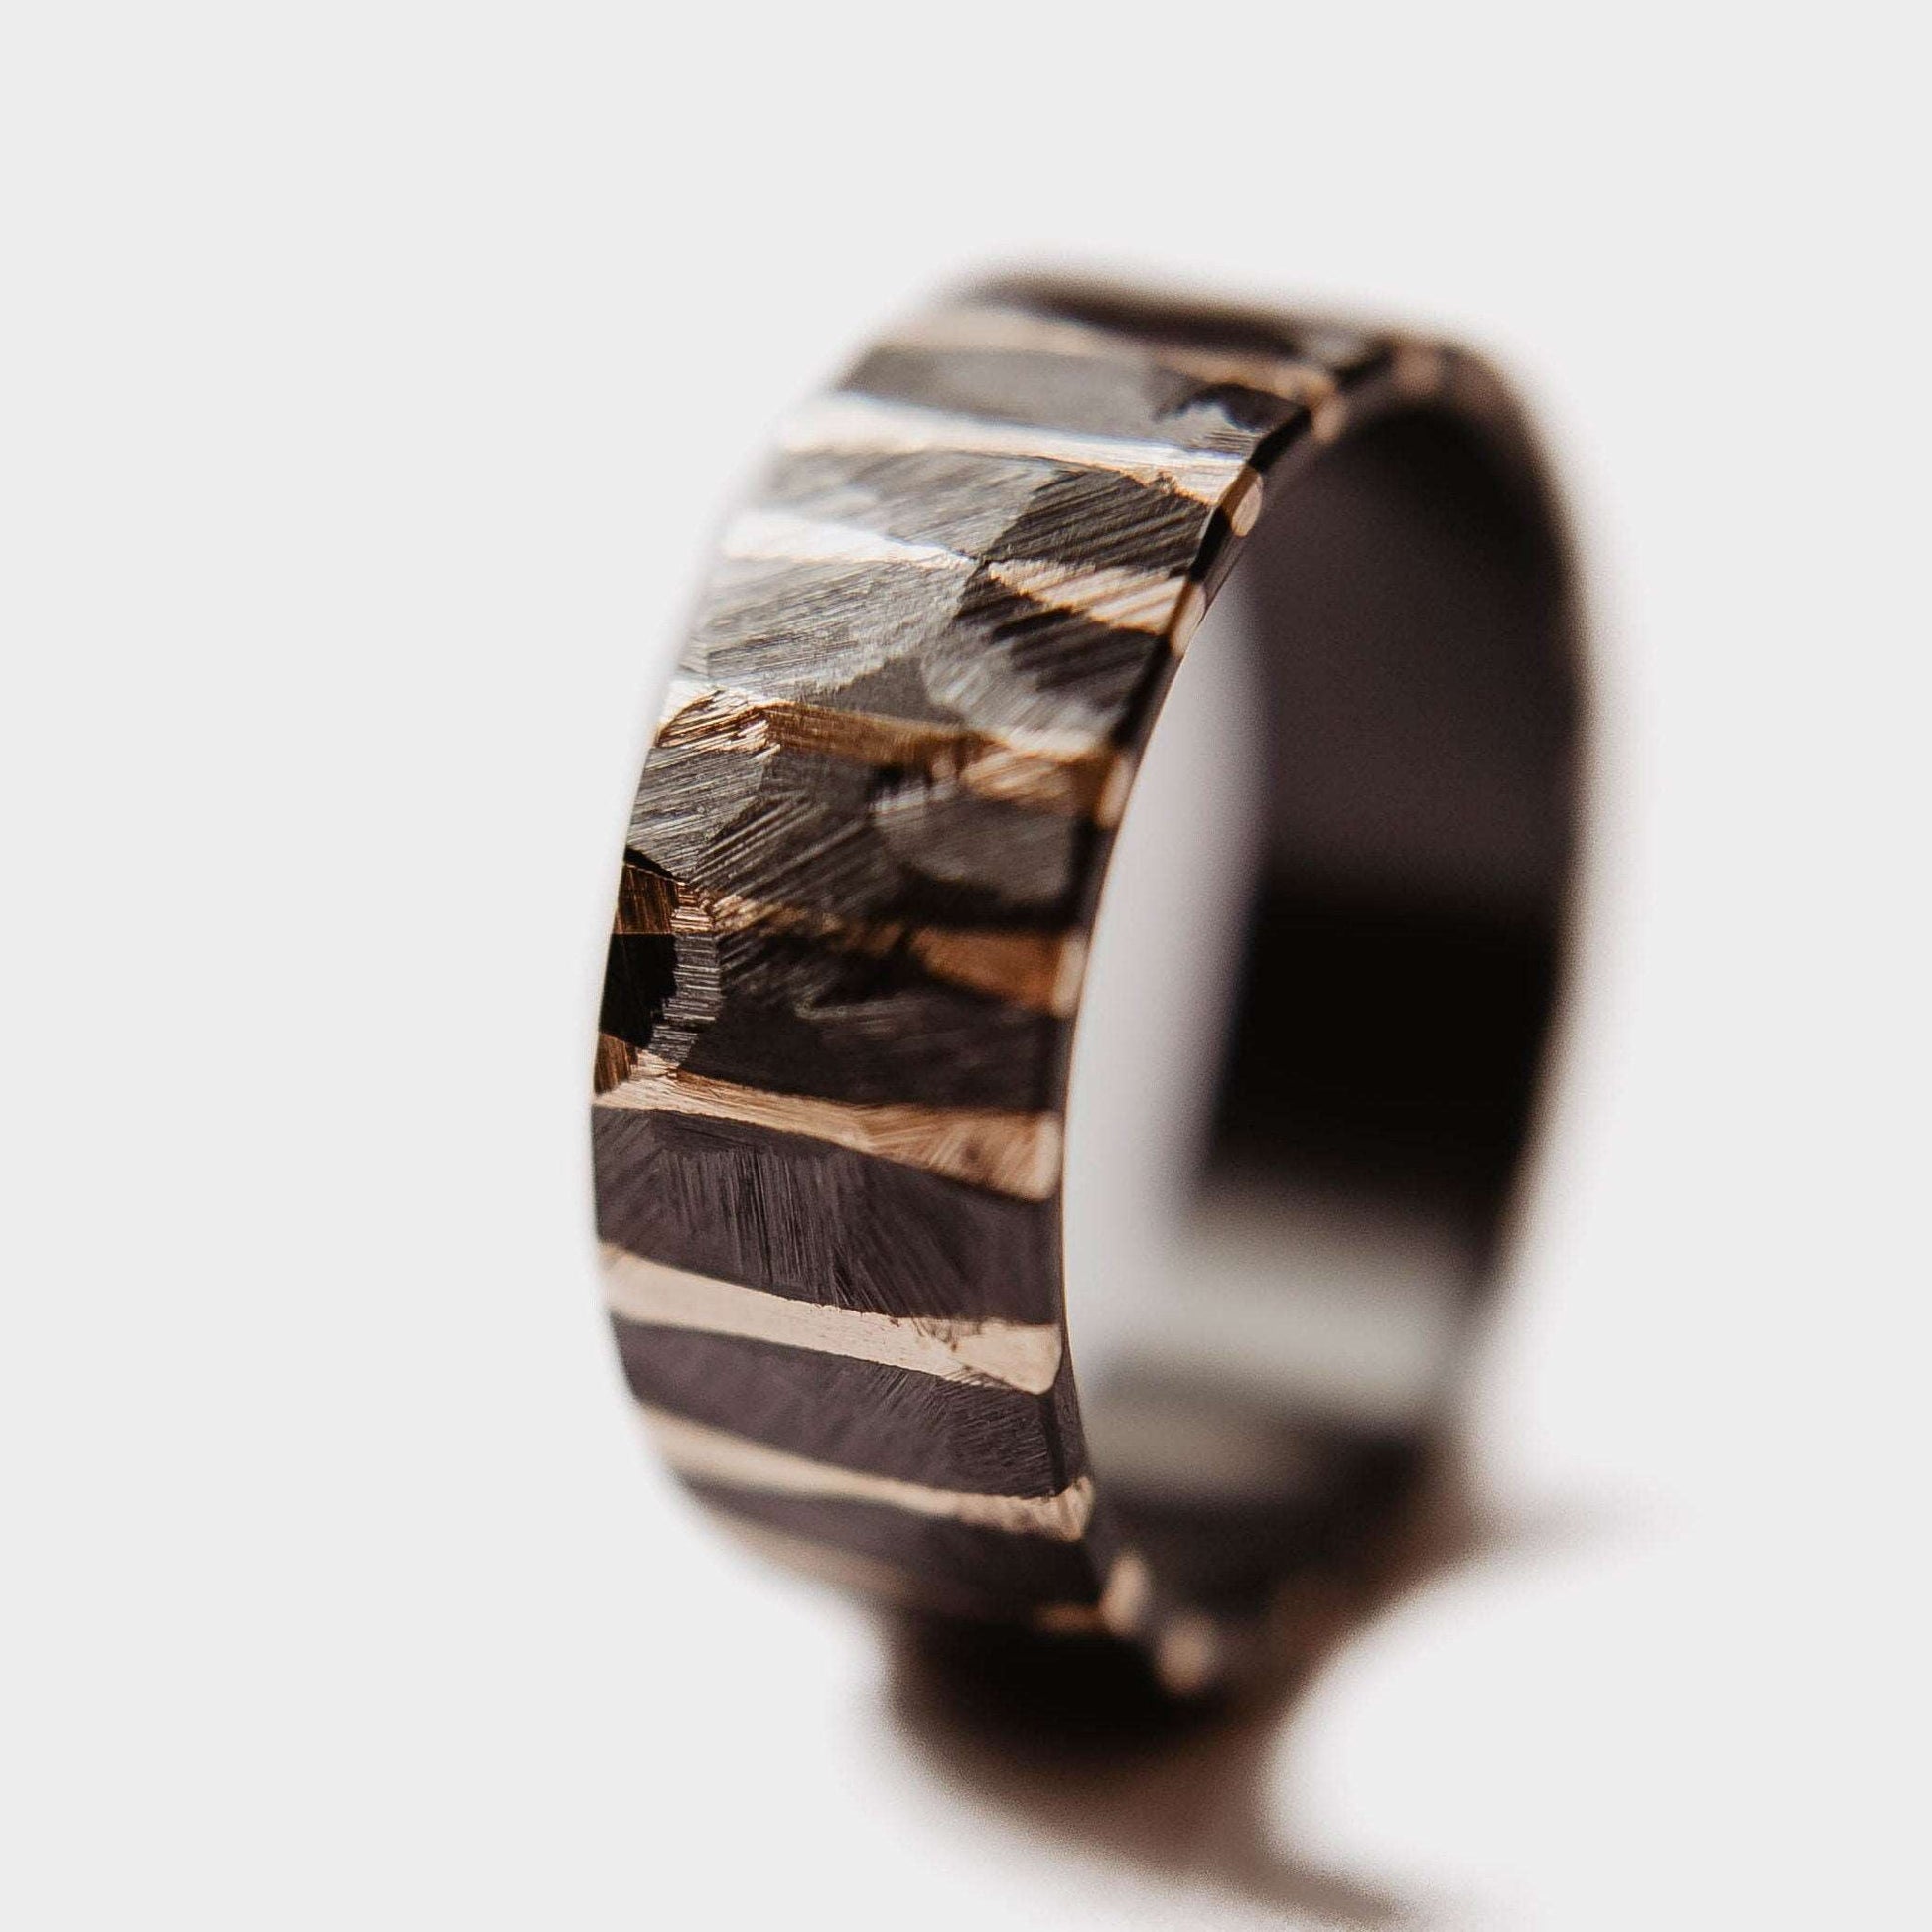 Gold Twilight Wedding Band. This photo shows a roughly faceted zirconium wedding band with 14k gold stripes (Vertical with white background)